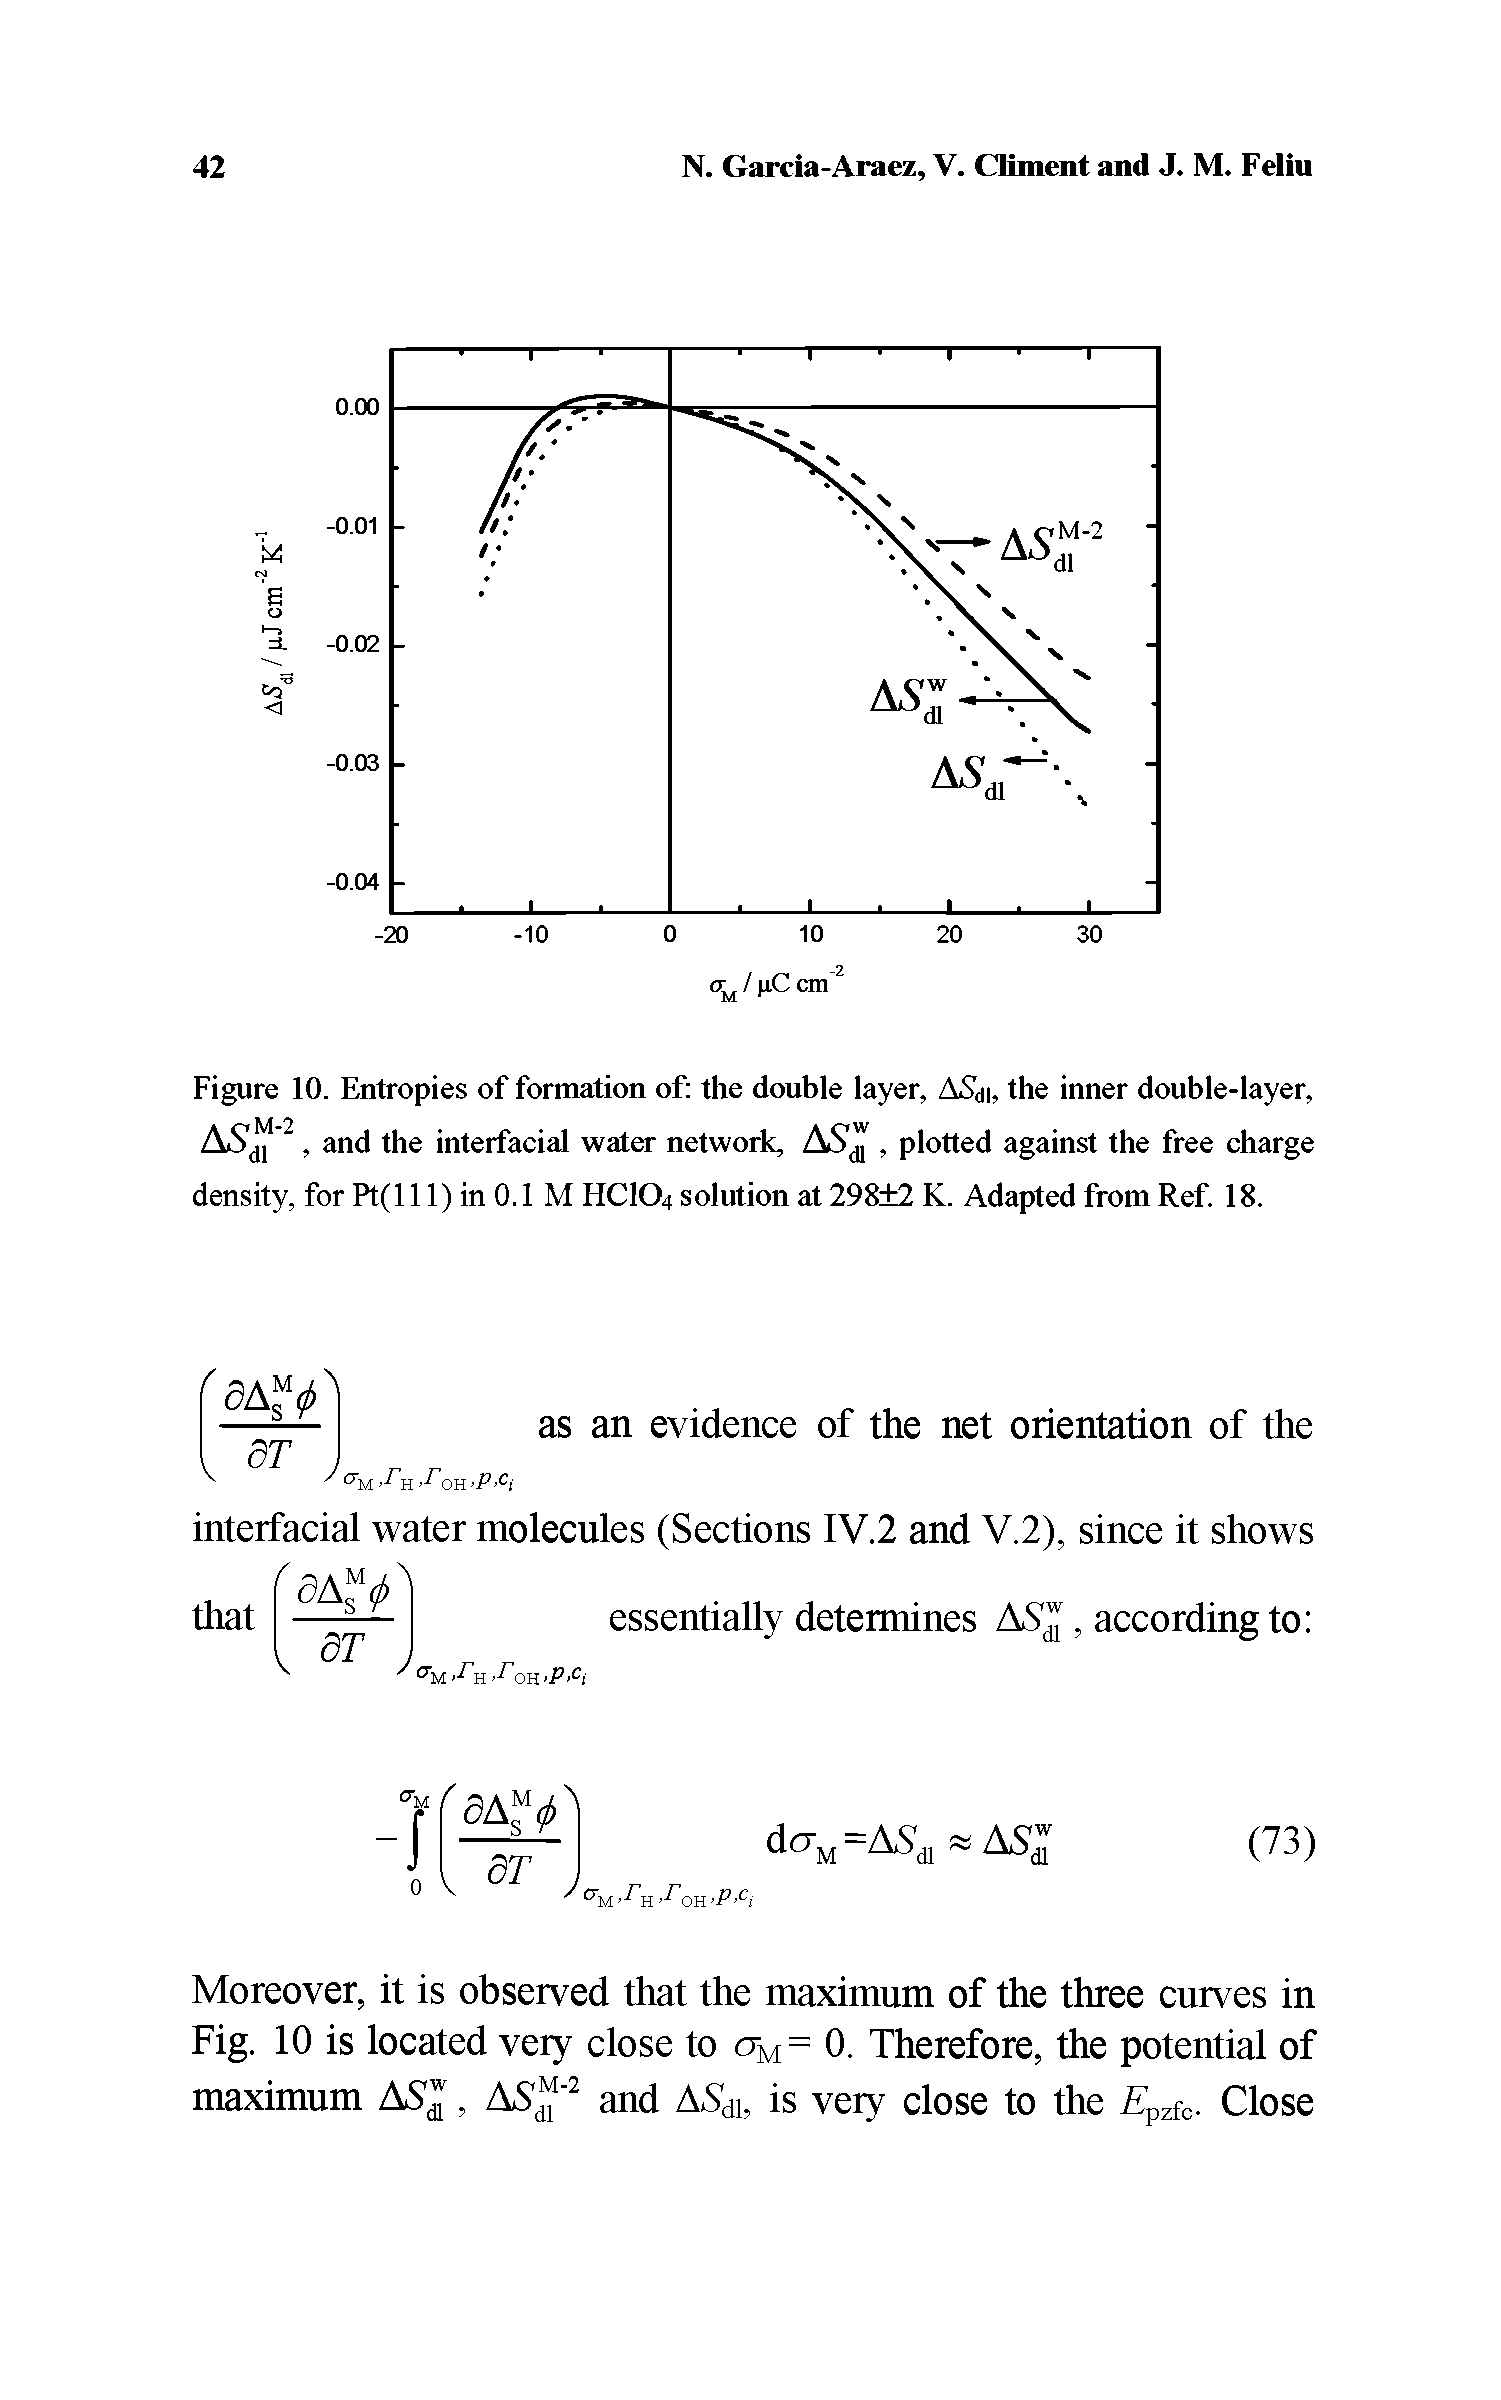 Figure 10. Entropies of formation of the double layer, ASdi, the inner double-layer, AS, and the interfacial water network,, plotted against the free charge density, for Pt(l 11) in 0.1 M HCIO4 solution at 298 2 K. Adapted from Ref. 18.